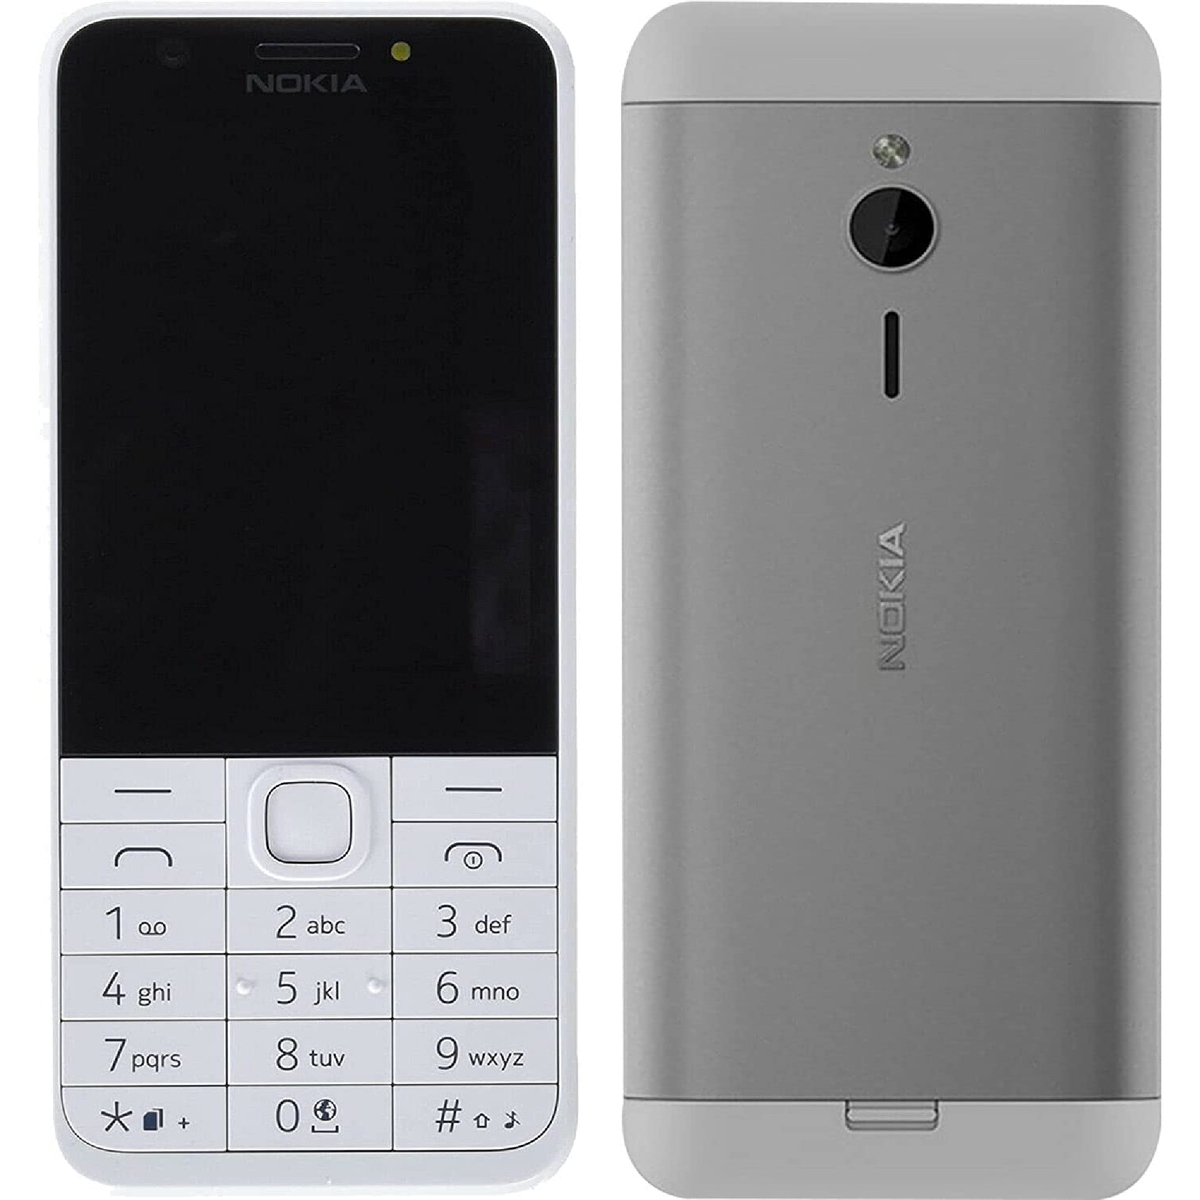 Nokia 230 Dual SIM 2G Feature Phone, 2.8 Inches Display, 16 MB RAM, Grey